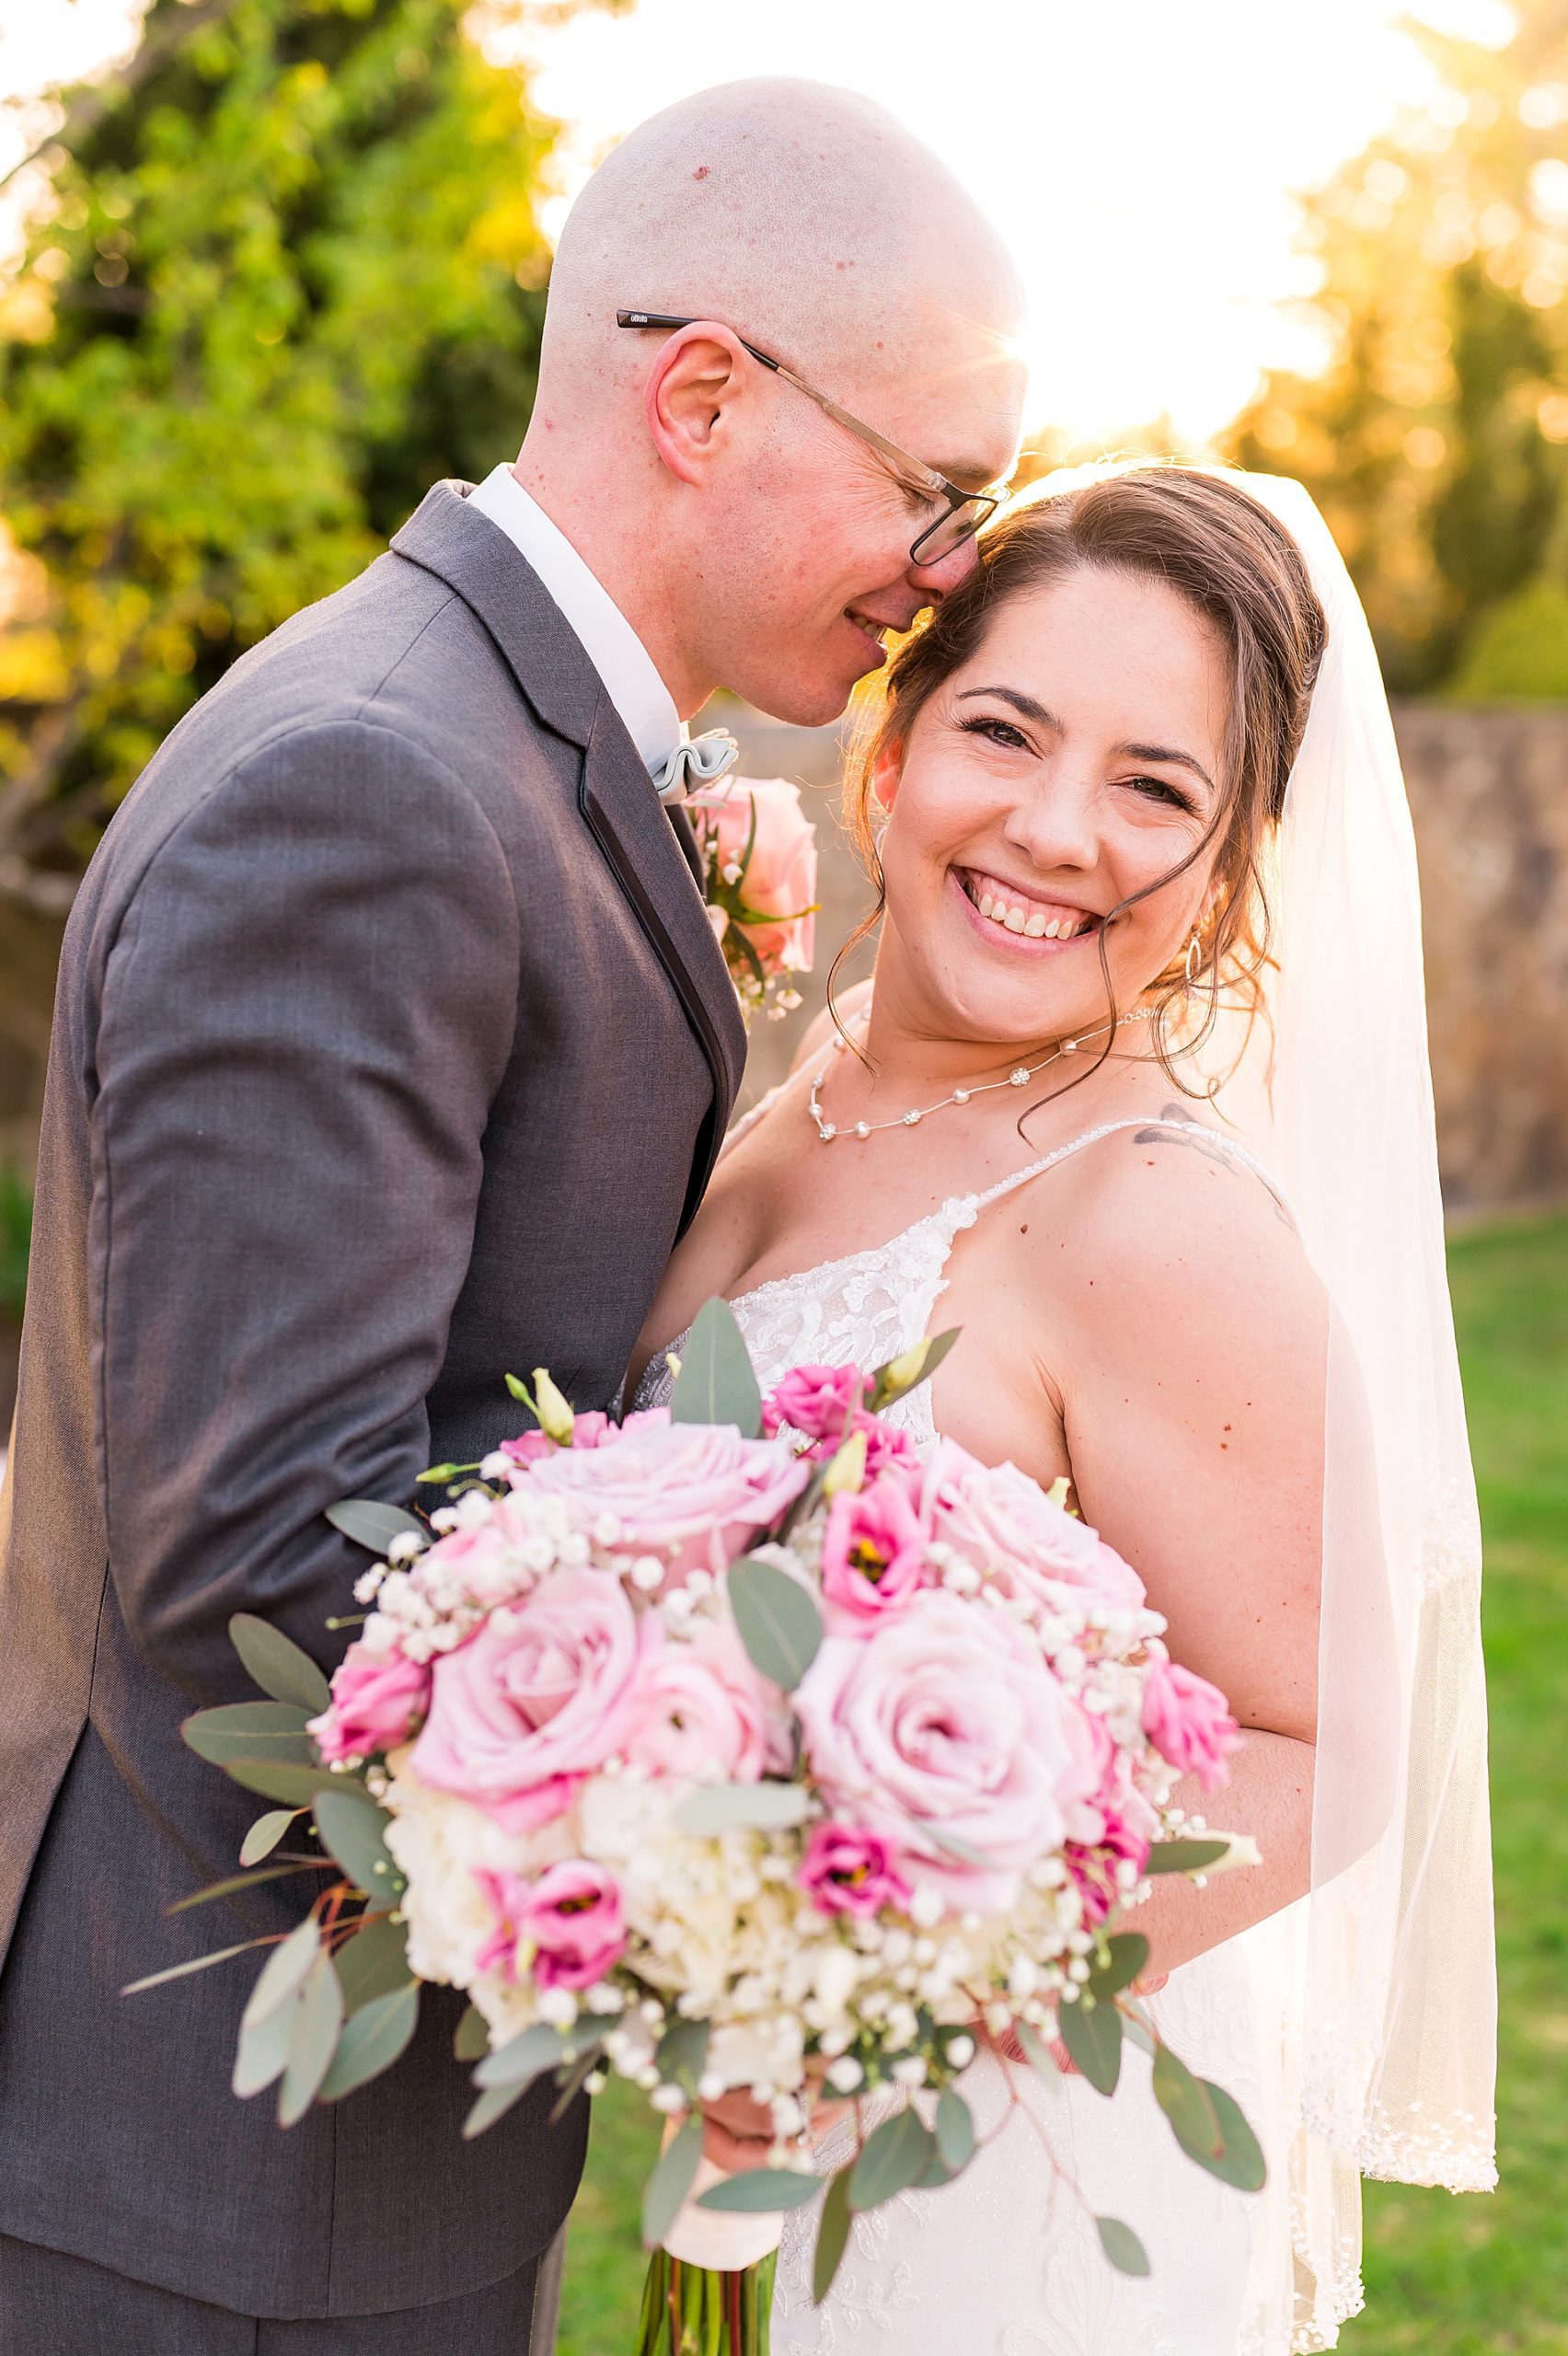 newlyweds hug while bride holds pink flower bouquet